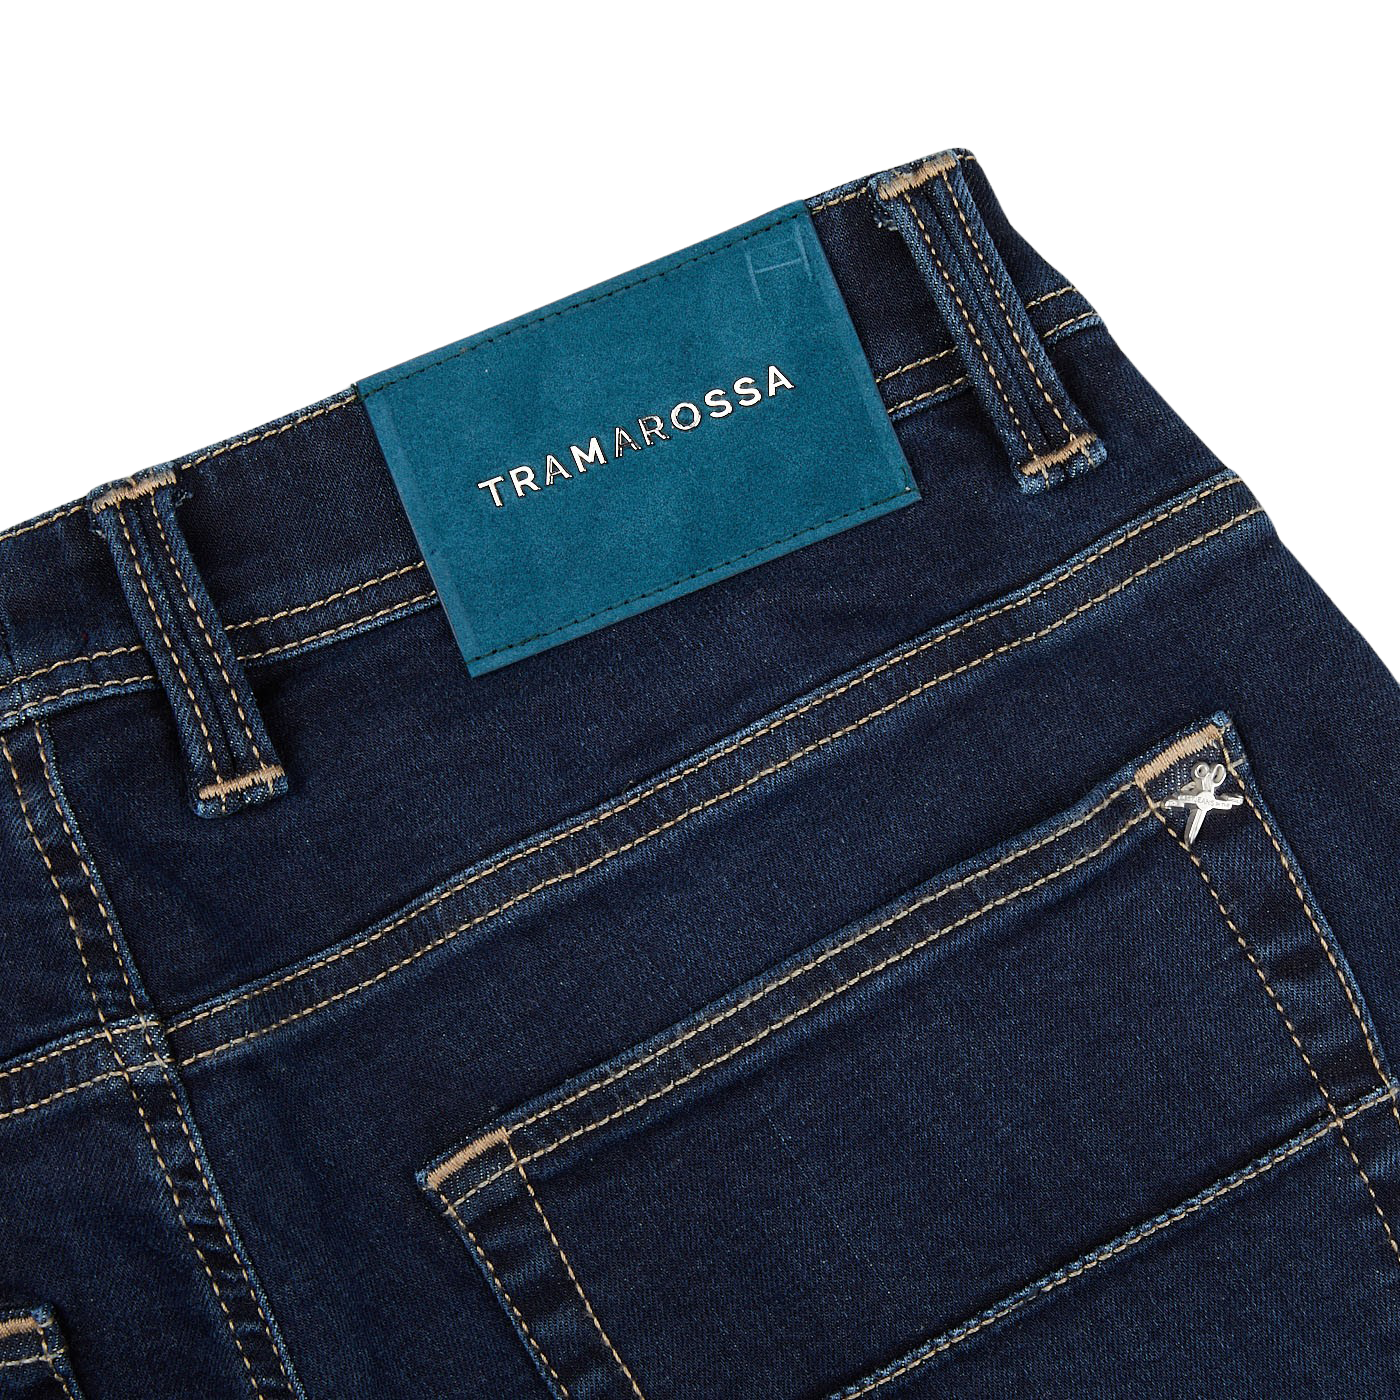 A pair of Tramarossa Dark Blue Leonardo 1 Month Jeans with a blue label on the pocket, made of Japanese denim.